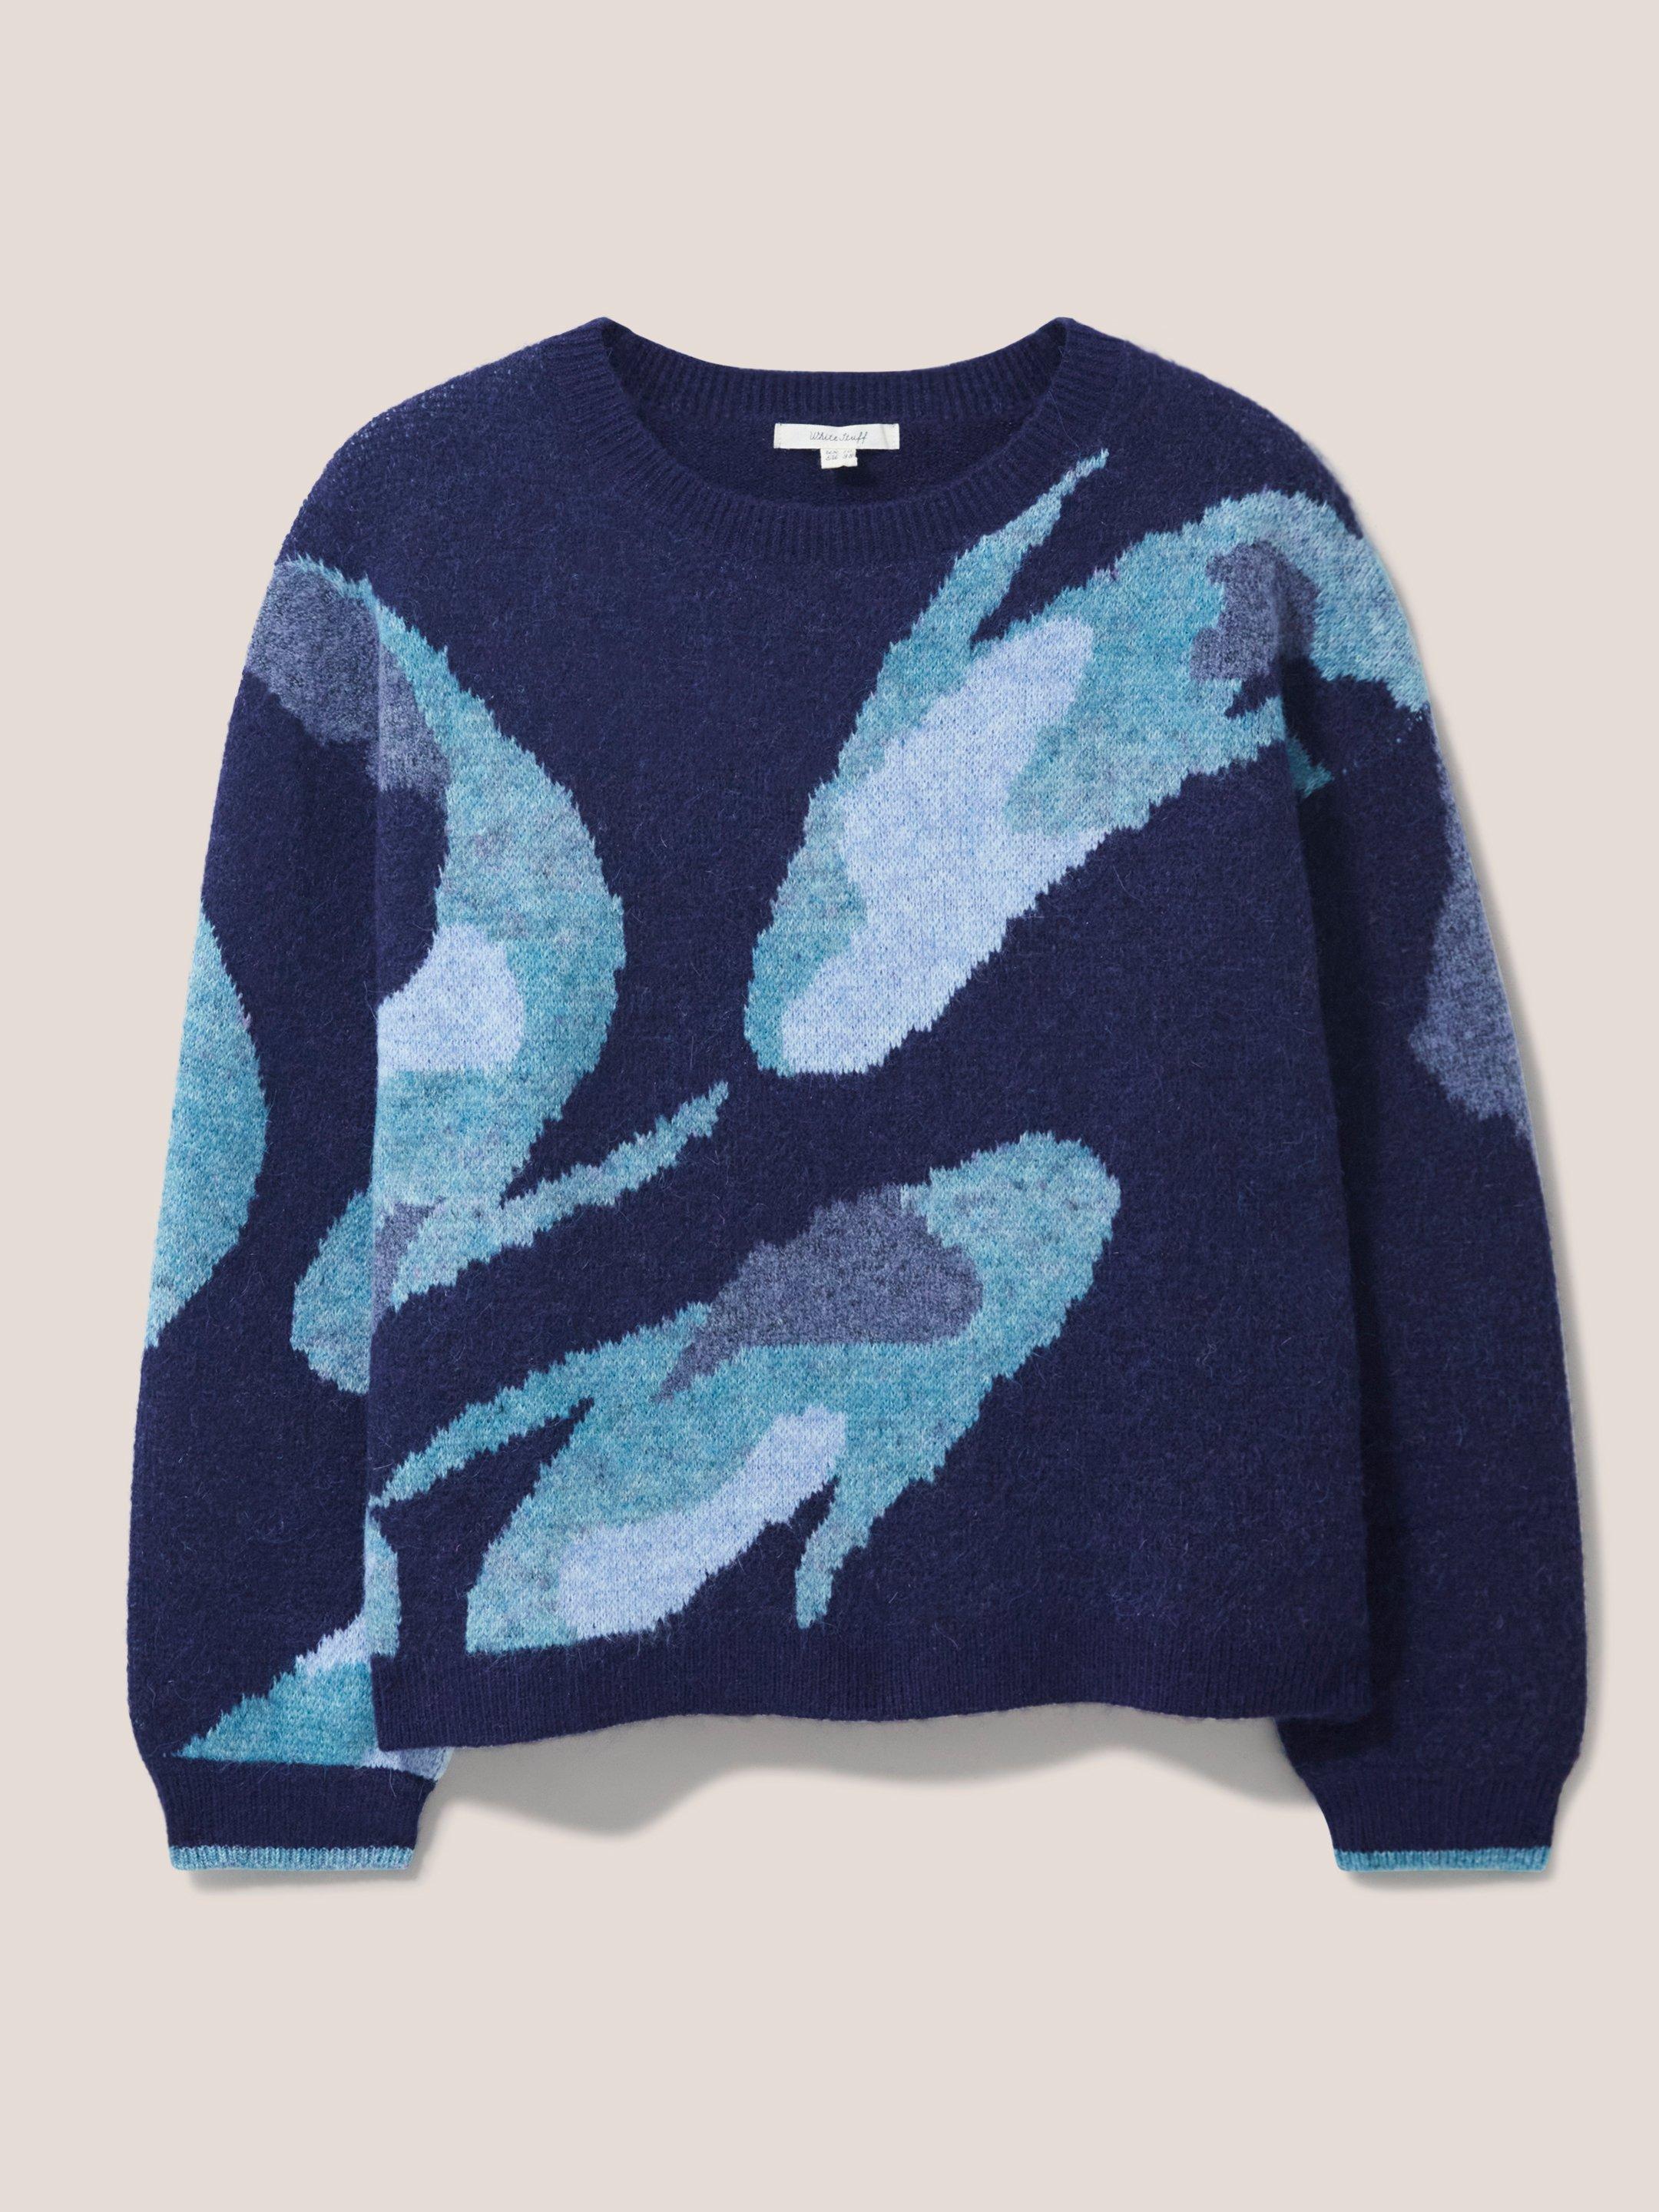 ABSTRACT KOI JUMPER in NAVY MULTI - FLAT FRONT